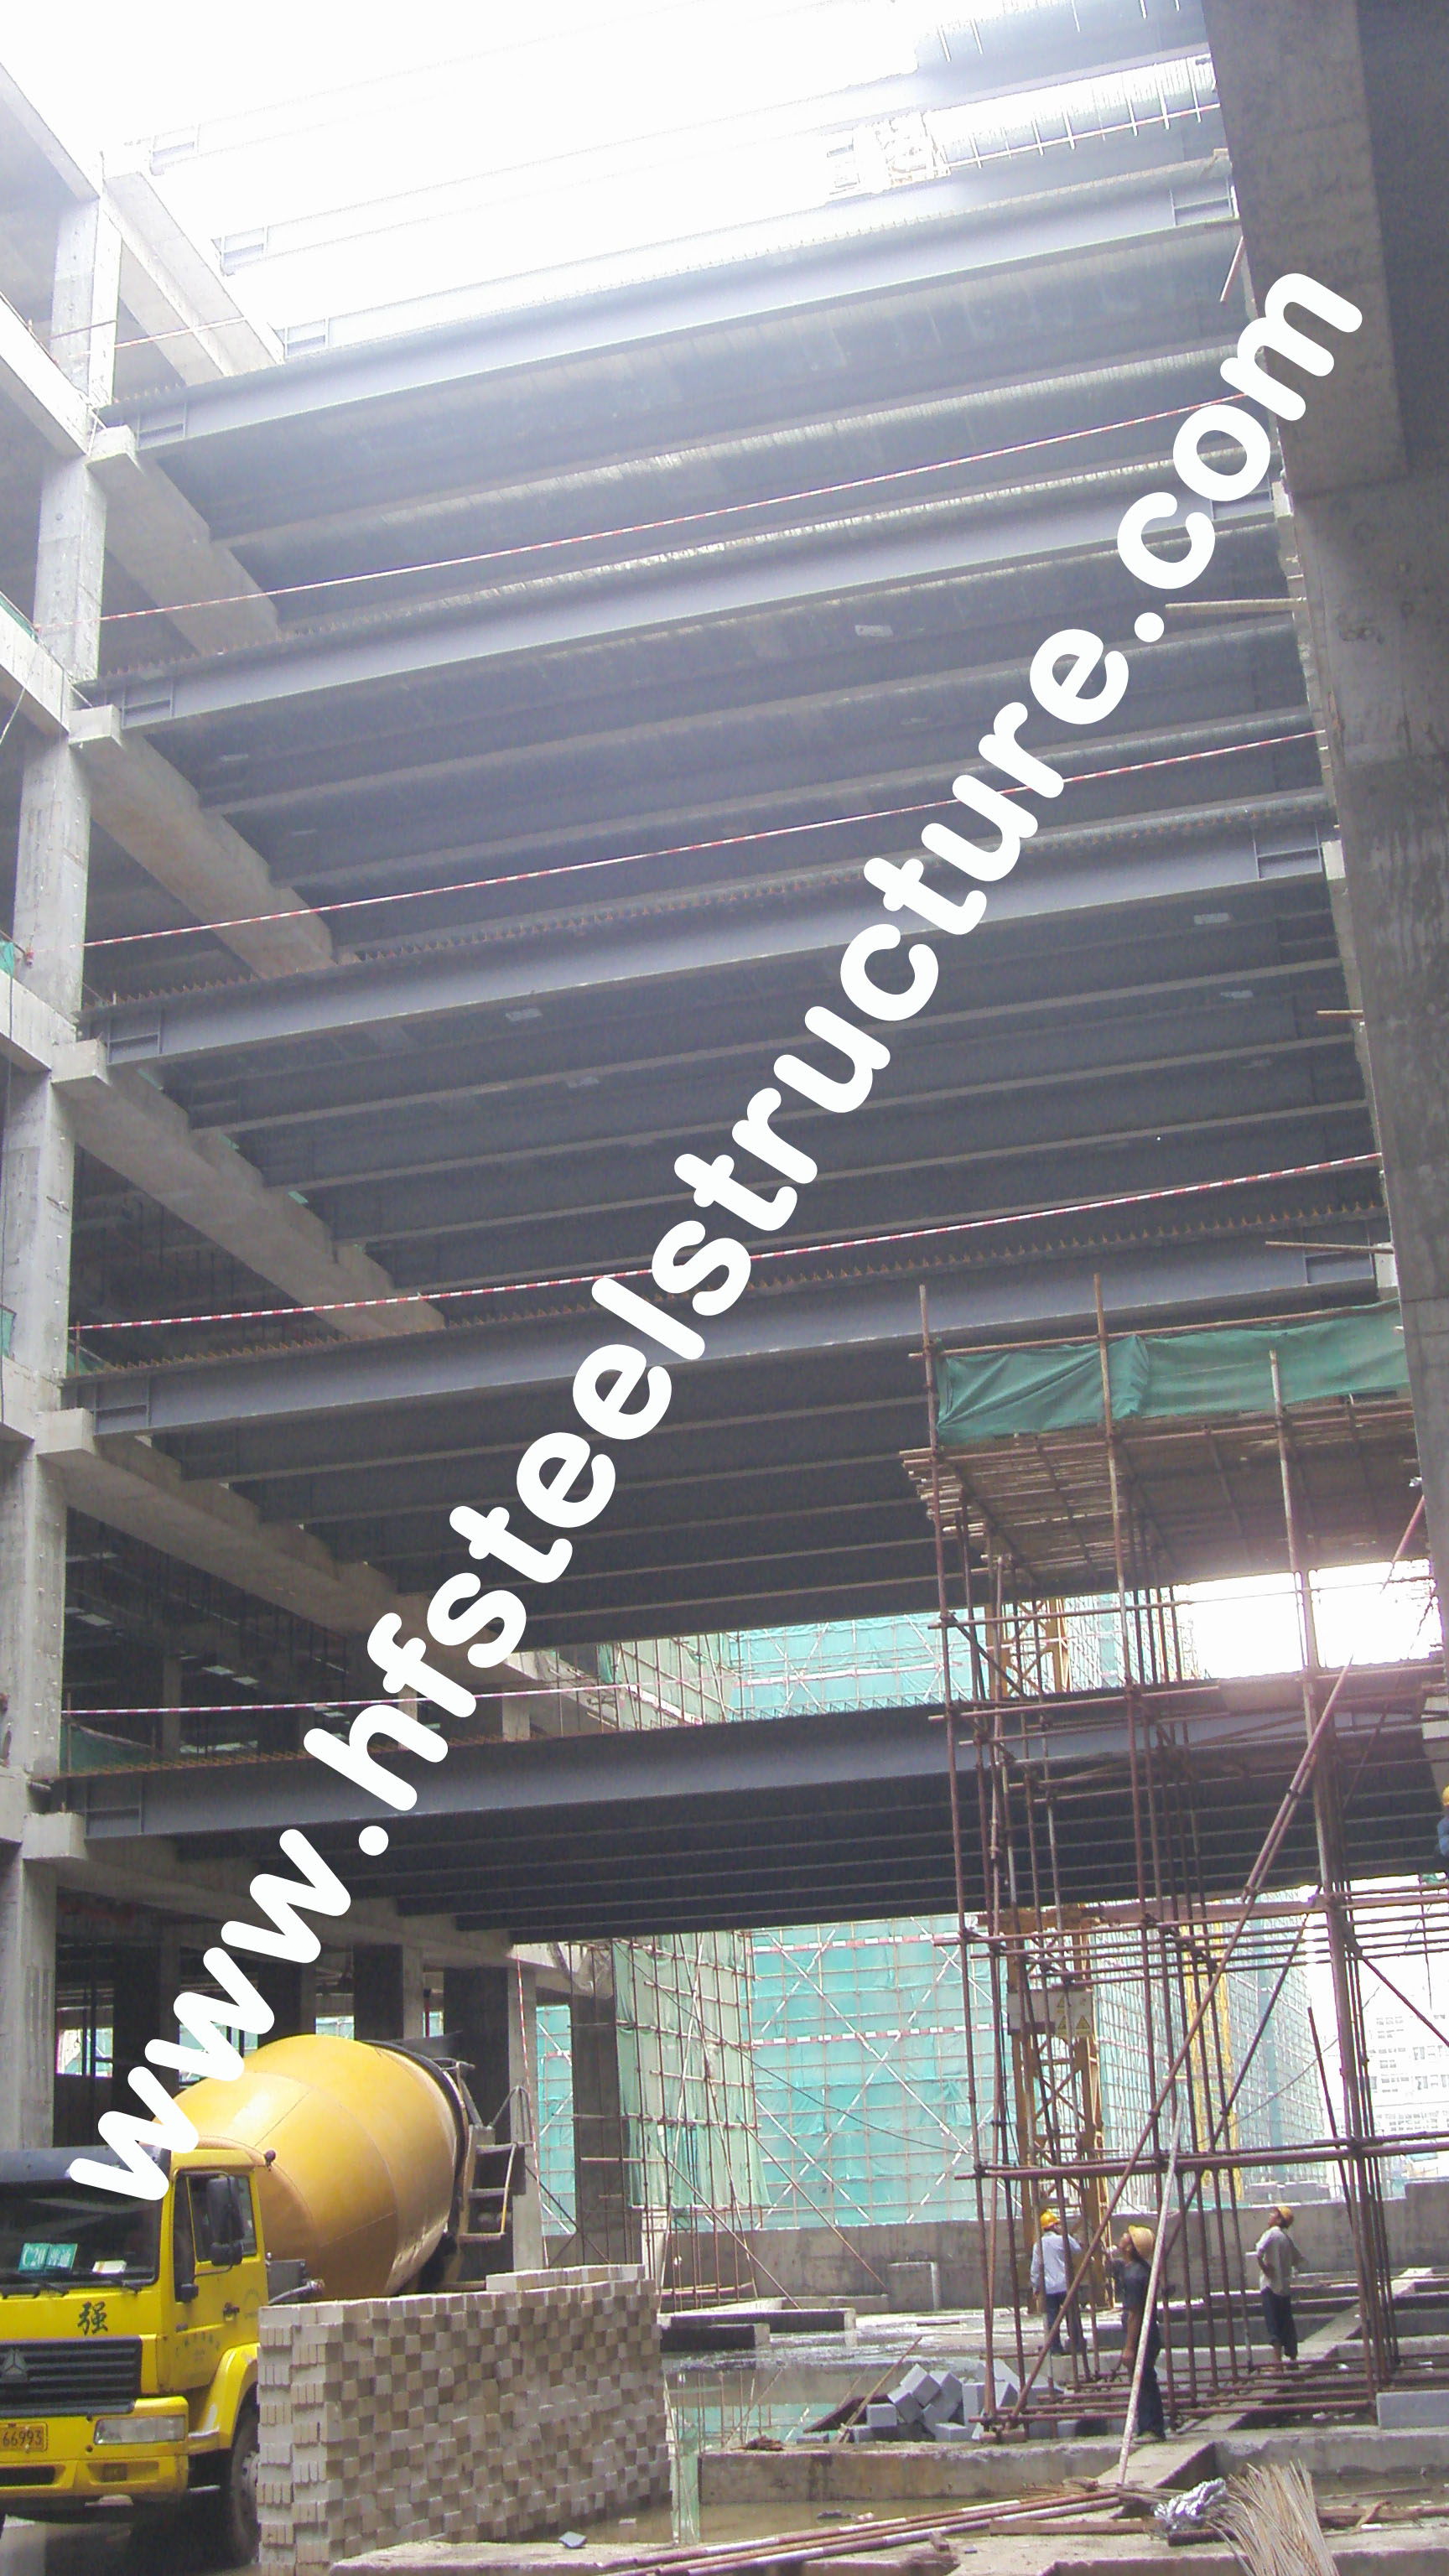 Contractor Fabricator Producing Frame Commercial Steel Buildings ASD Design Standards